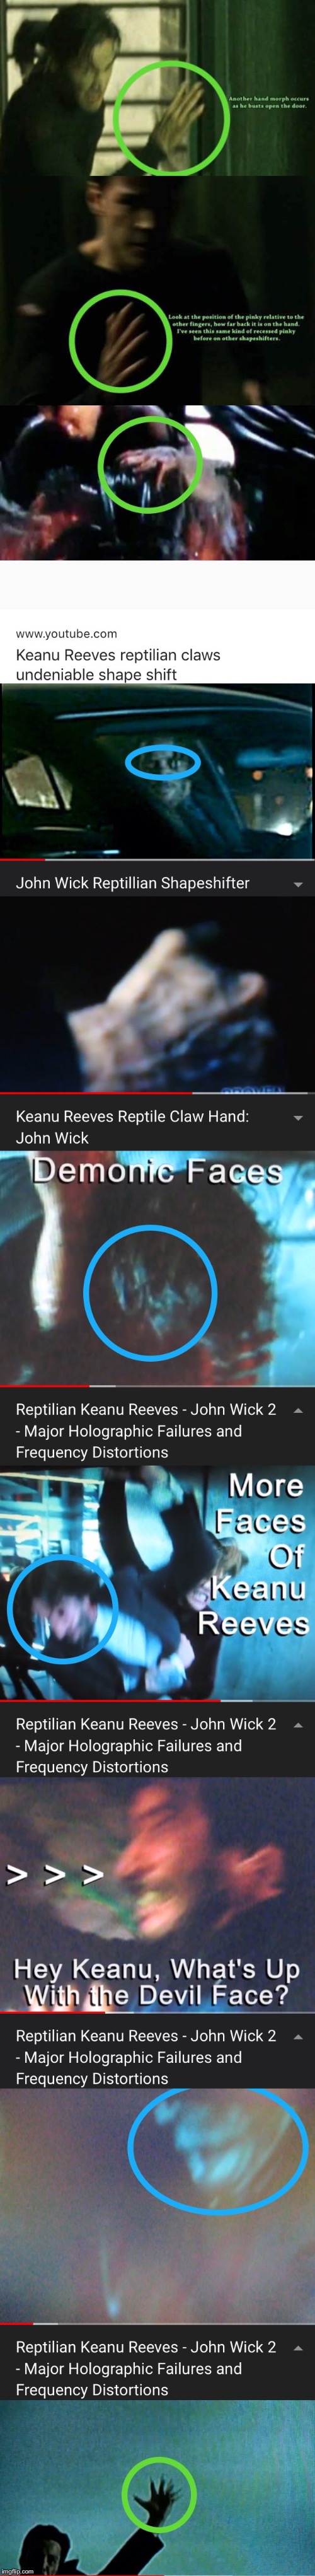 Keanu Reeves is an awesome reptilian shapeshifter | image tagged in keanu reeves,memes,reptilians,shapeshifting lizard | made w/ Imgflip meme maker